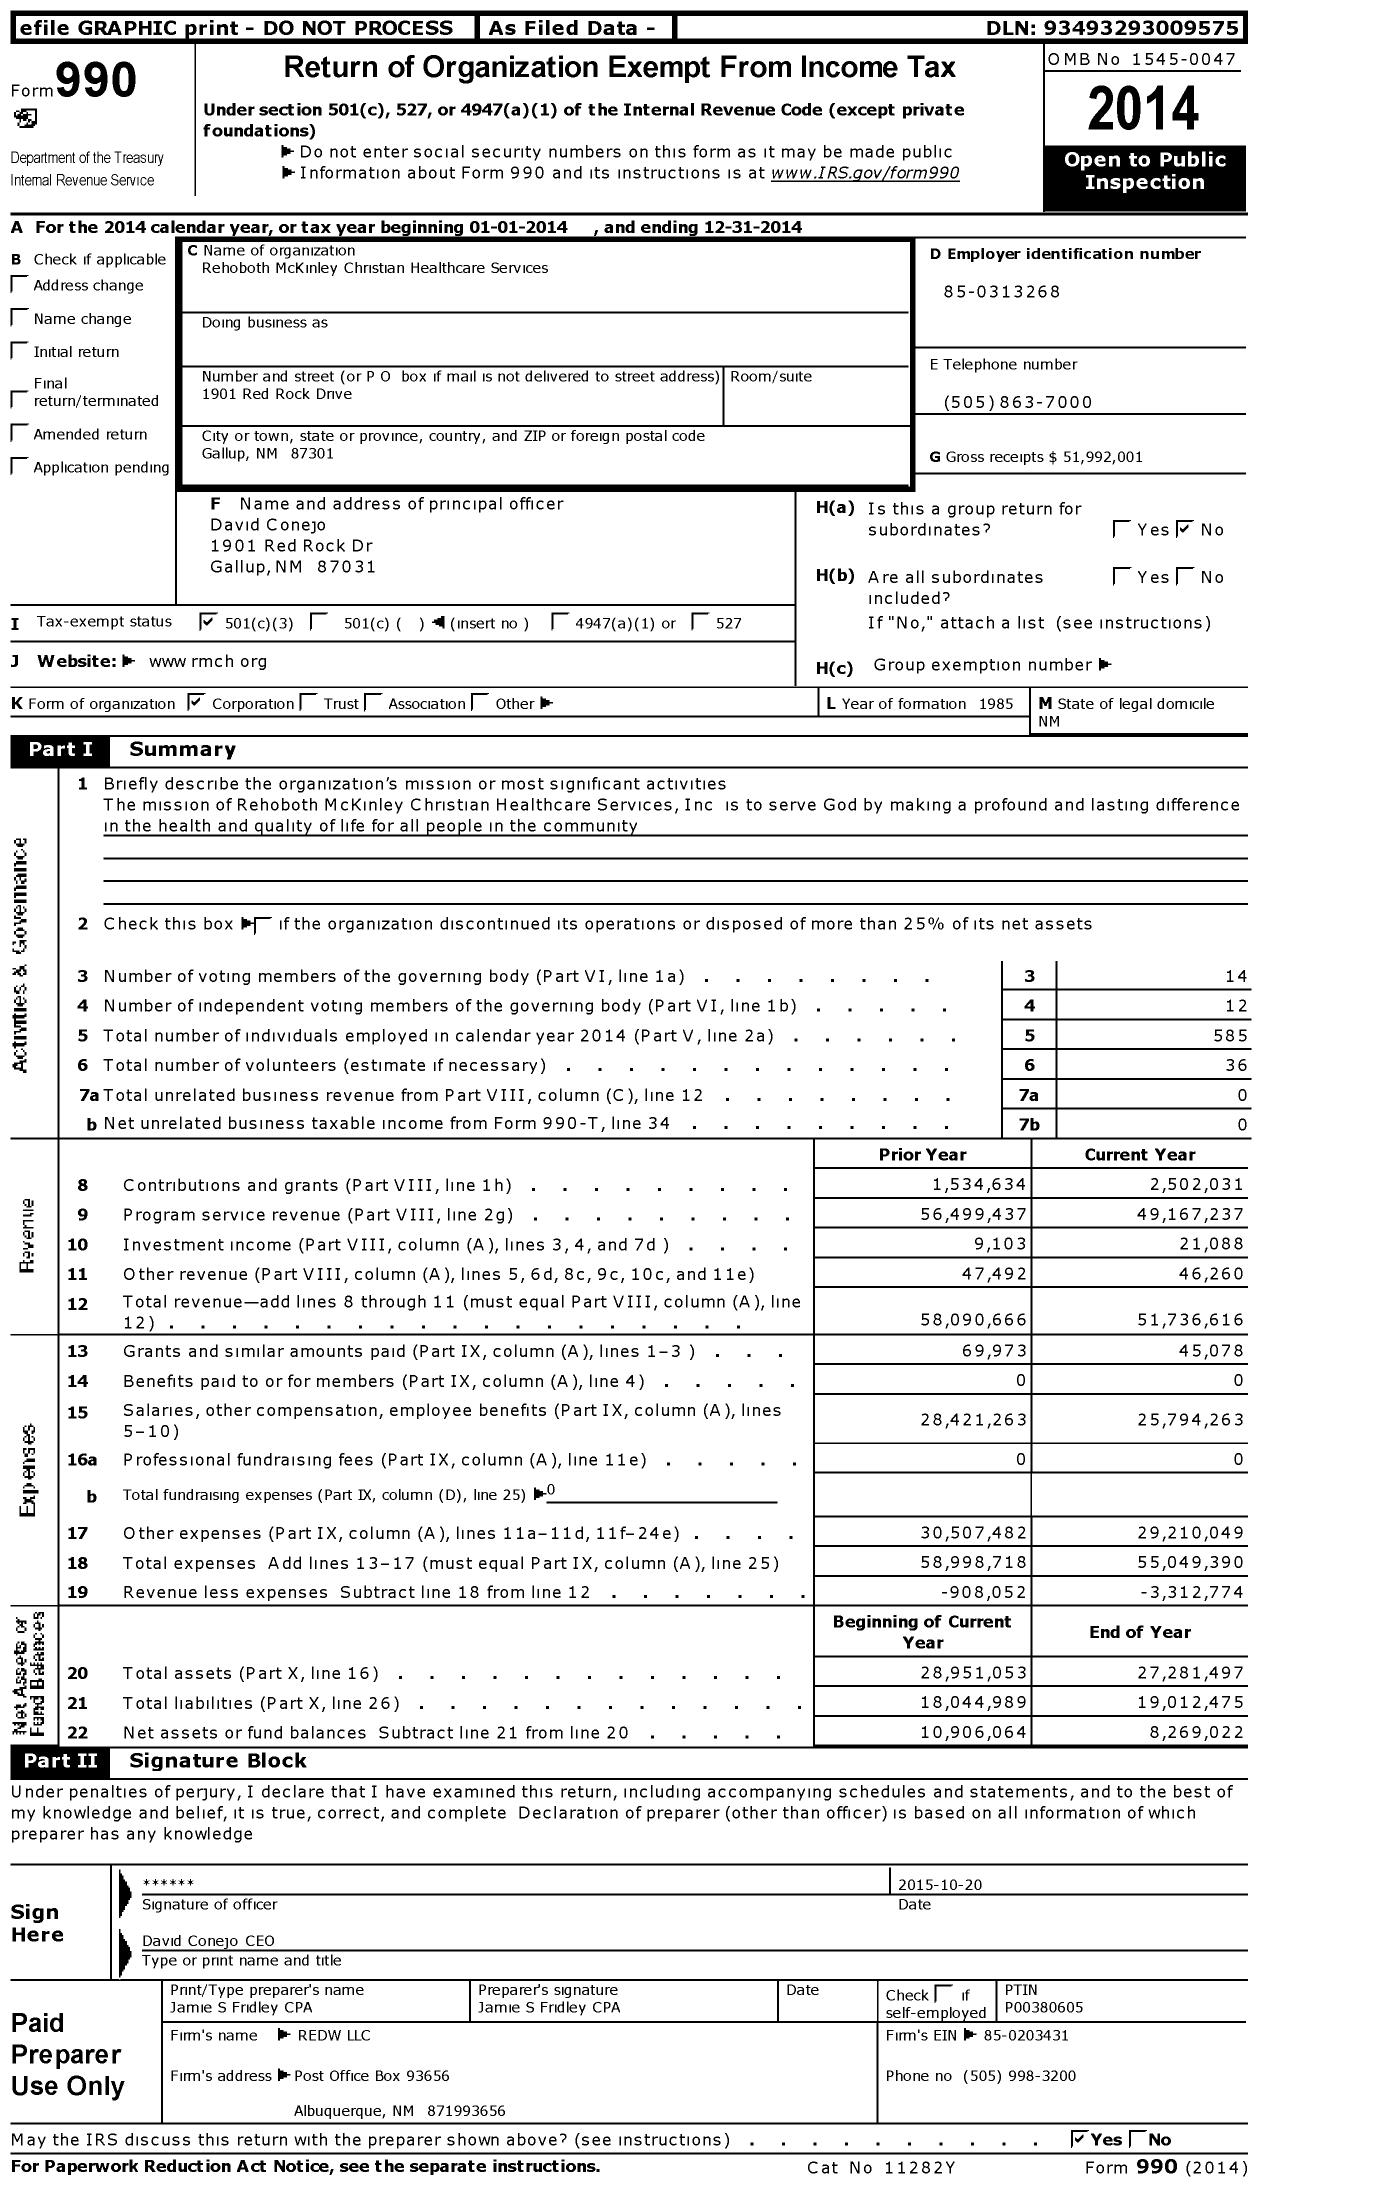 Image of first page of 2014 Form 990 for Rehoboth Mckinley Christian Health Care Services (RMCHCS)